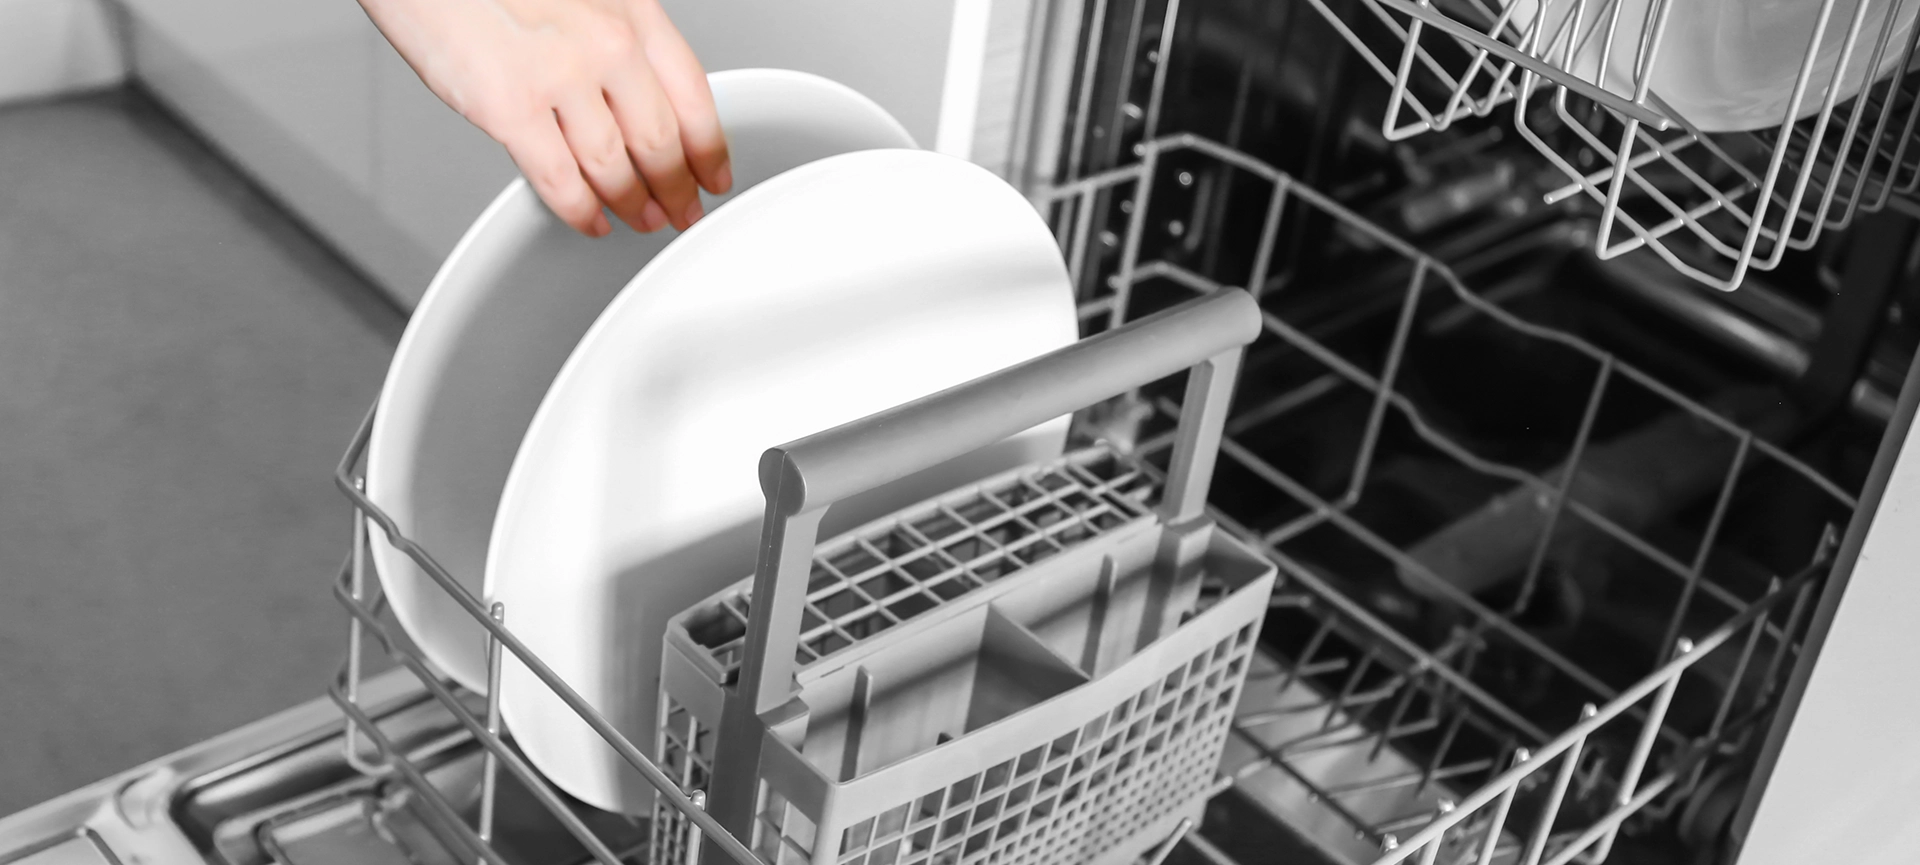 LG Dishwasher IE Error – Meaning, Causes and Solutions 